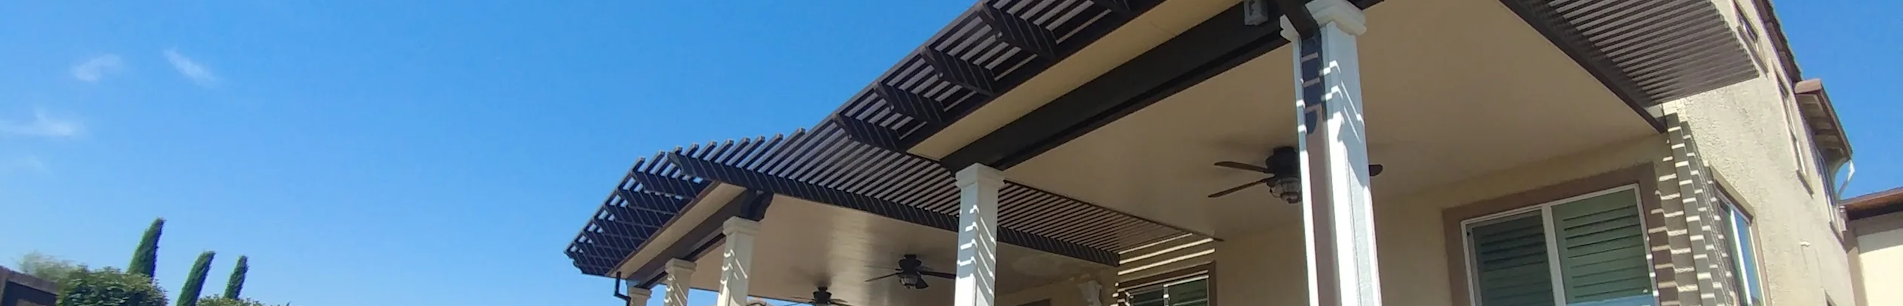 Aluminum Patio Covers Gallery - Gallery of Patio Cover Design & Installation Lincoln CA